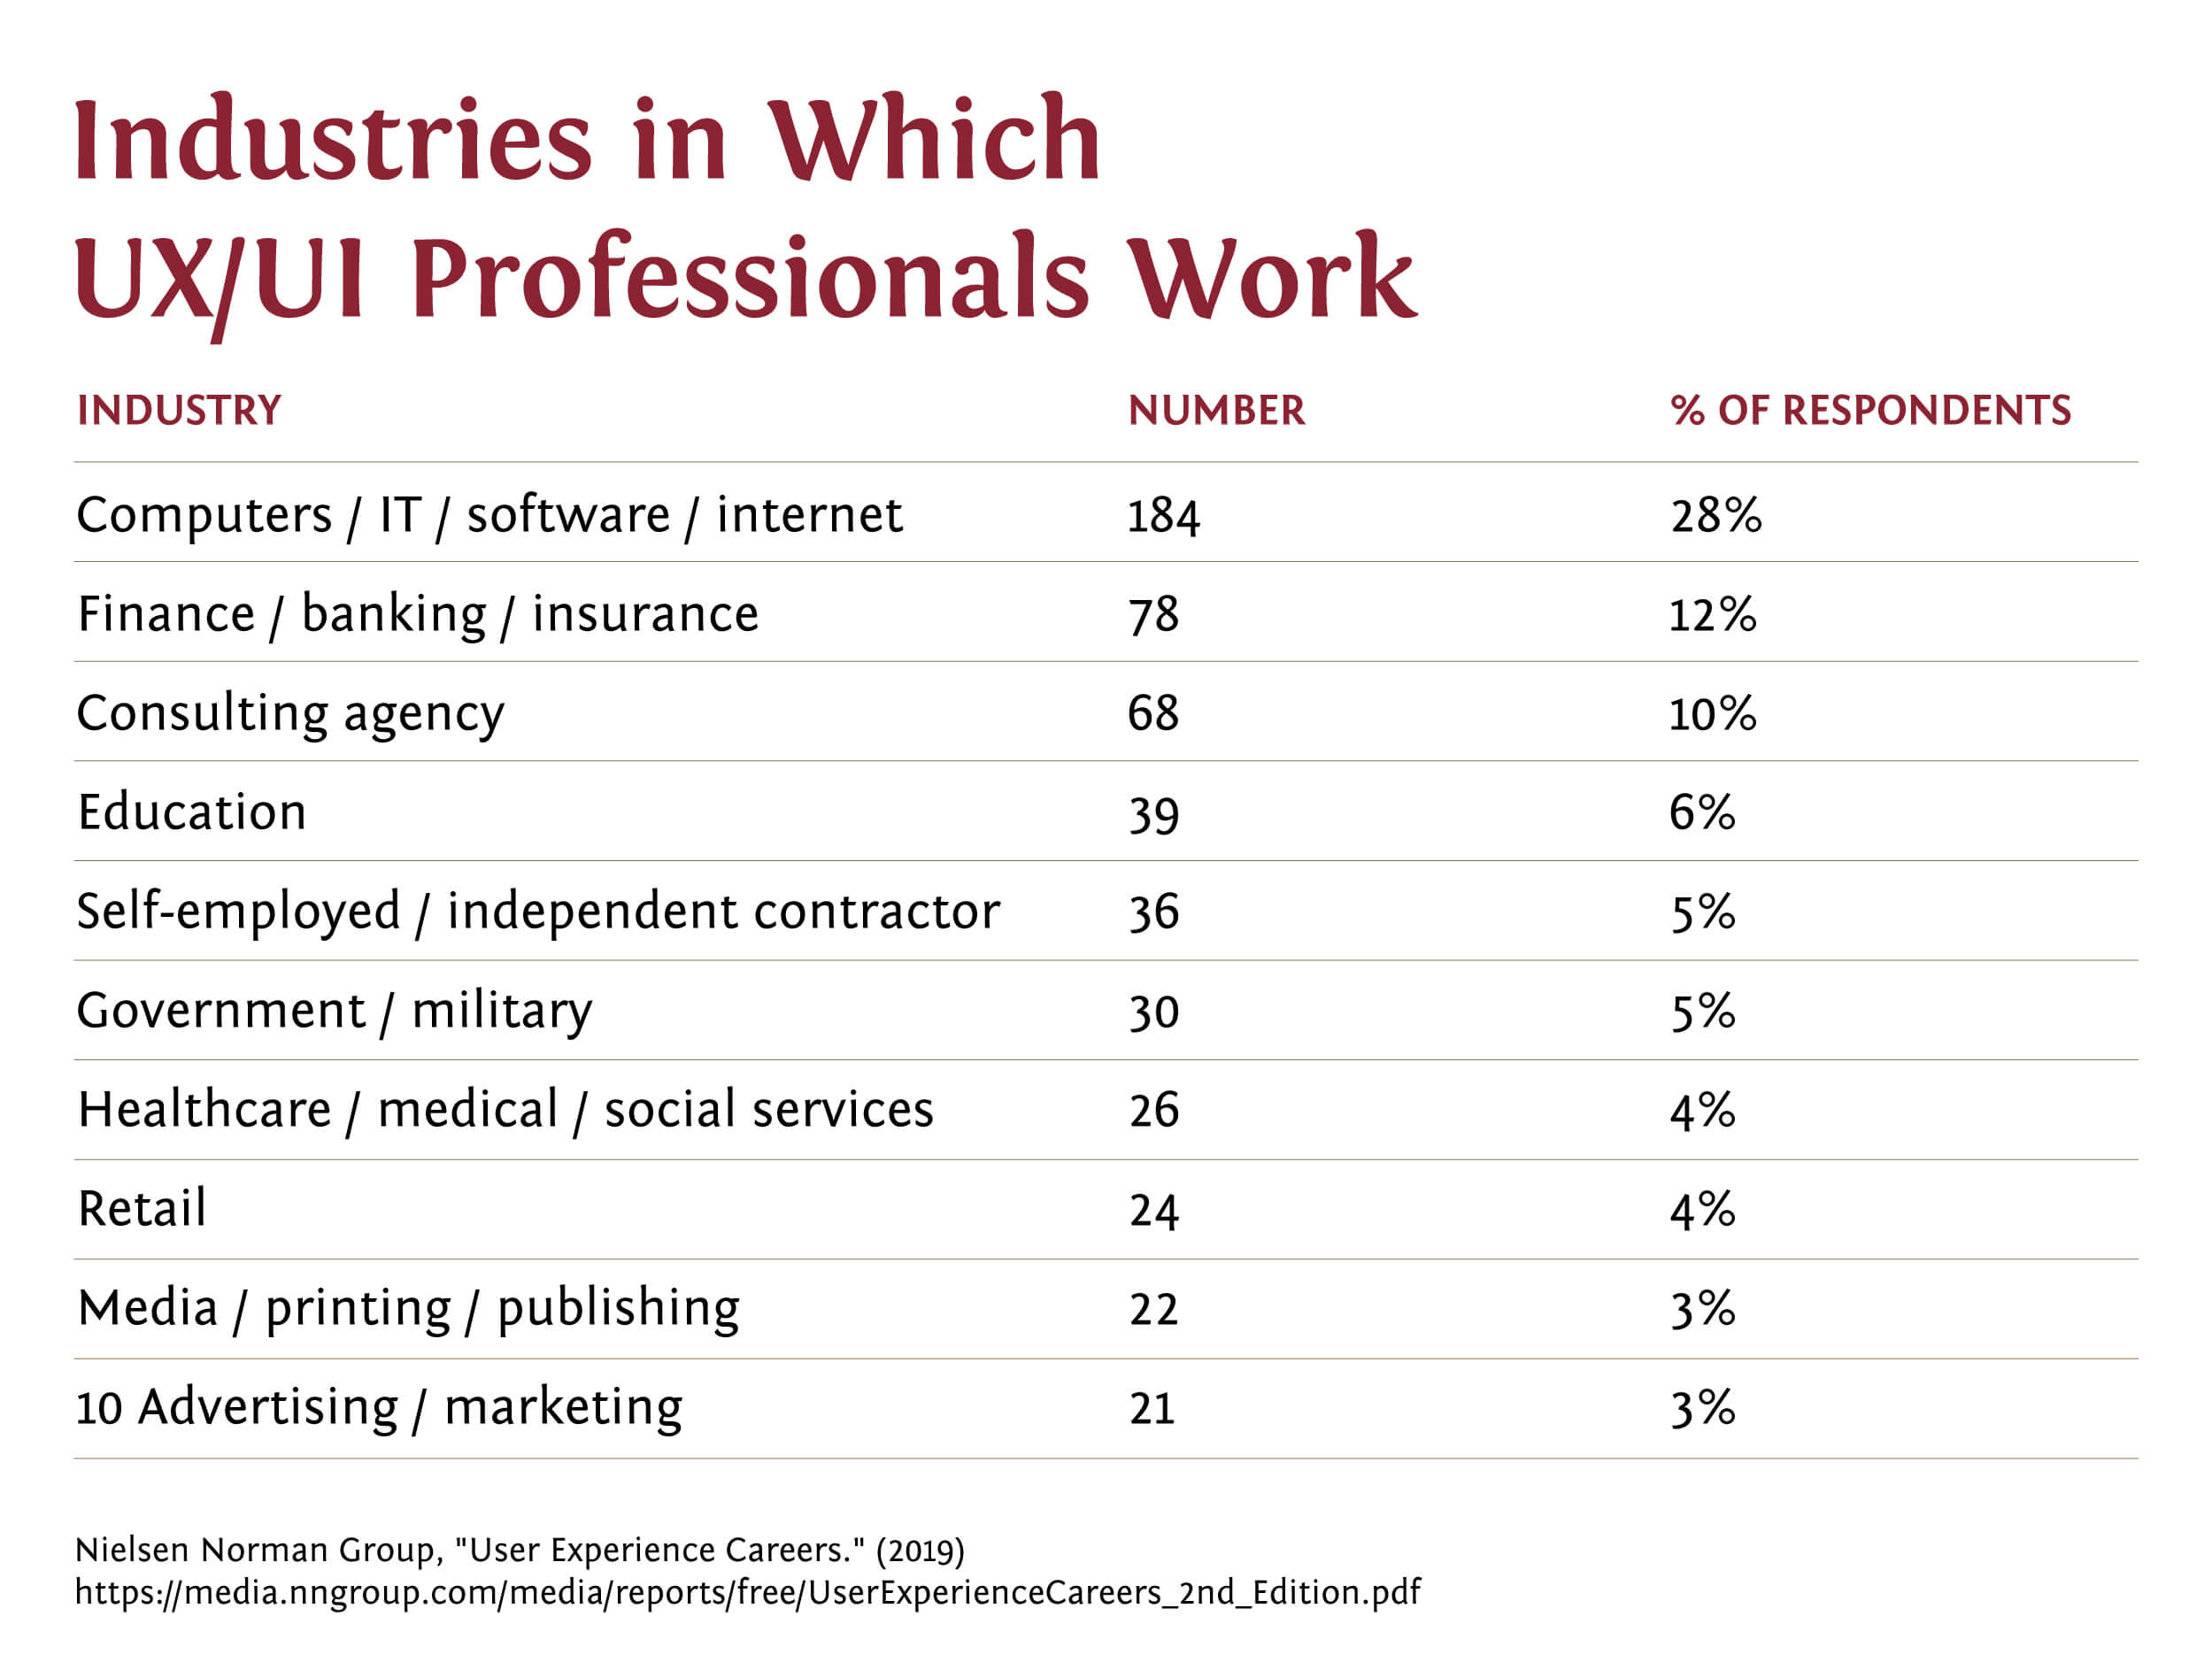 The most popular industries in which UI and UX professionals work